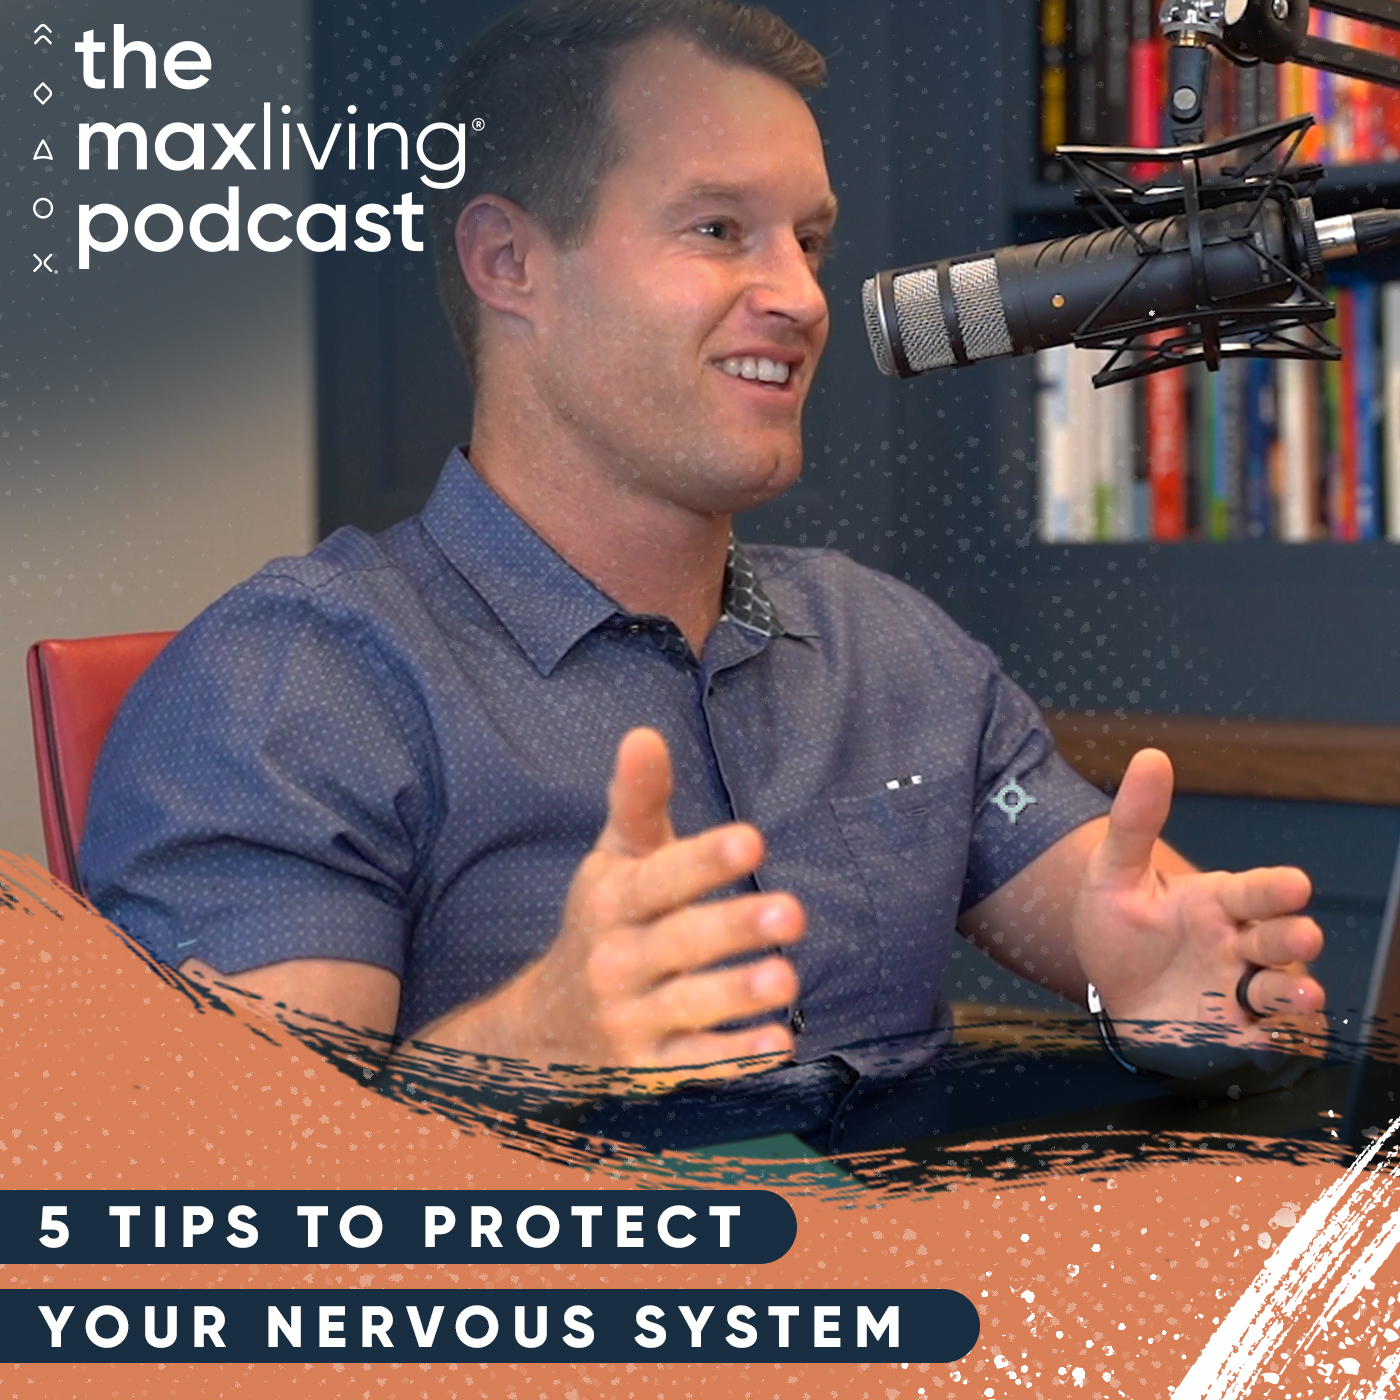 Tips to Protect Your Nervous System | The MaxLiving Podcast